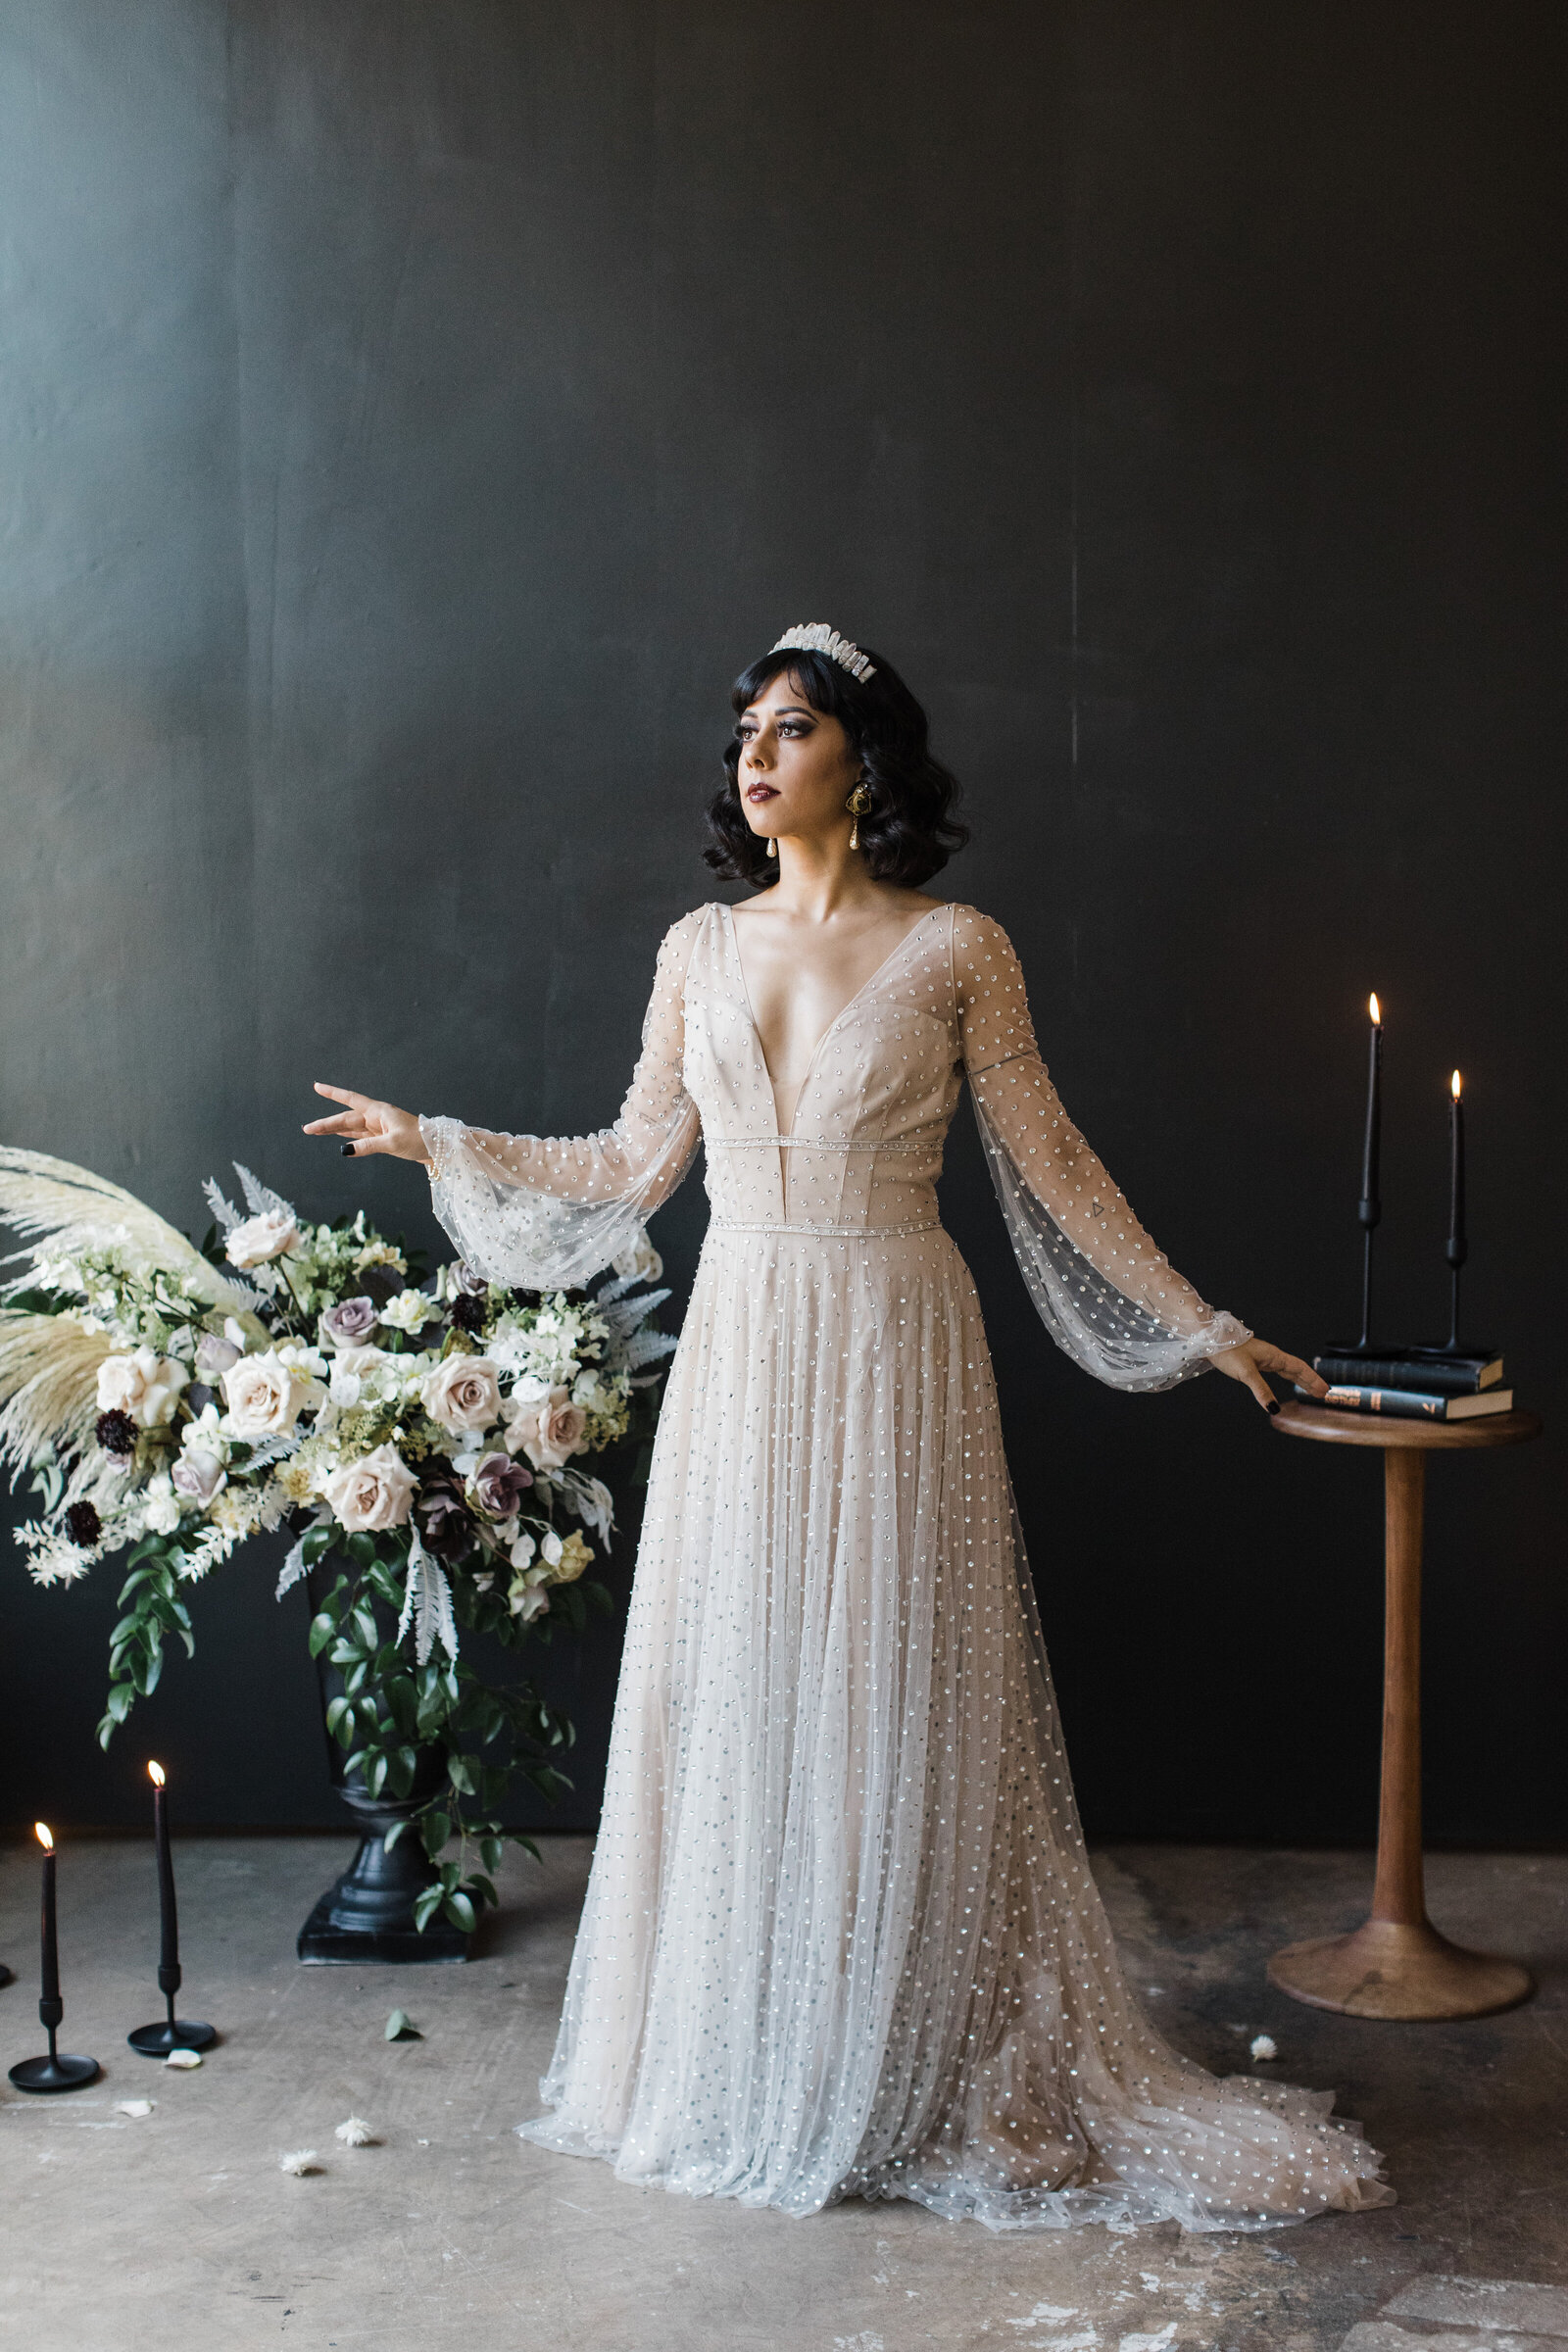 A bride posing gracefully and looking ethereal in a photo studio. She is surrounded by books, black candles, bouquets and is standing in front of a black background. She is wearing a long sleeve, detailed, lace dress and a white crown as well as dark makeup.